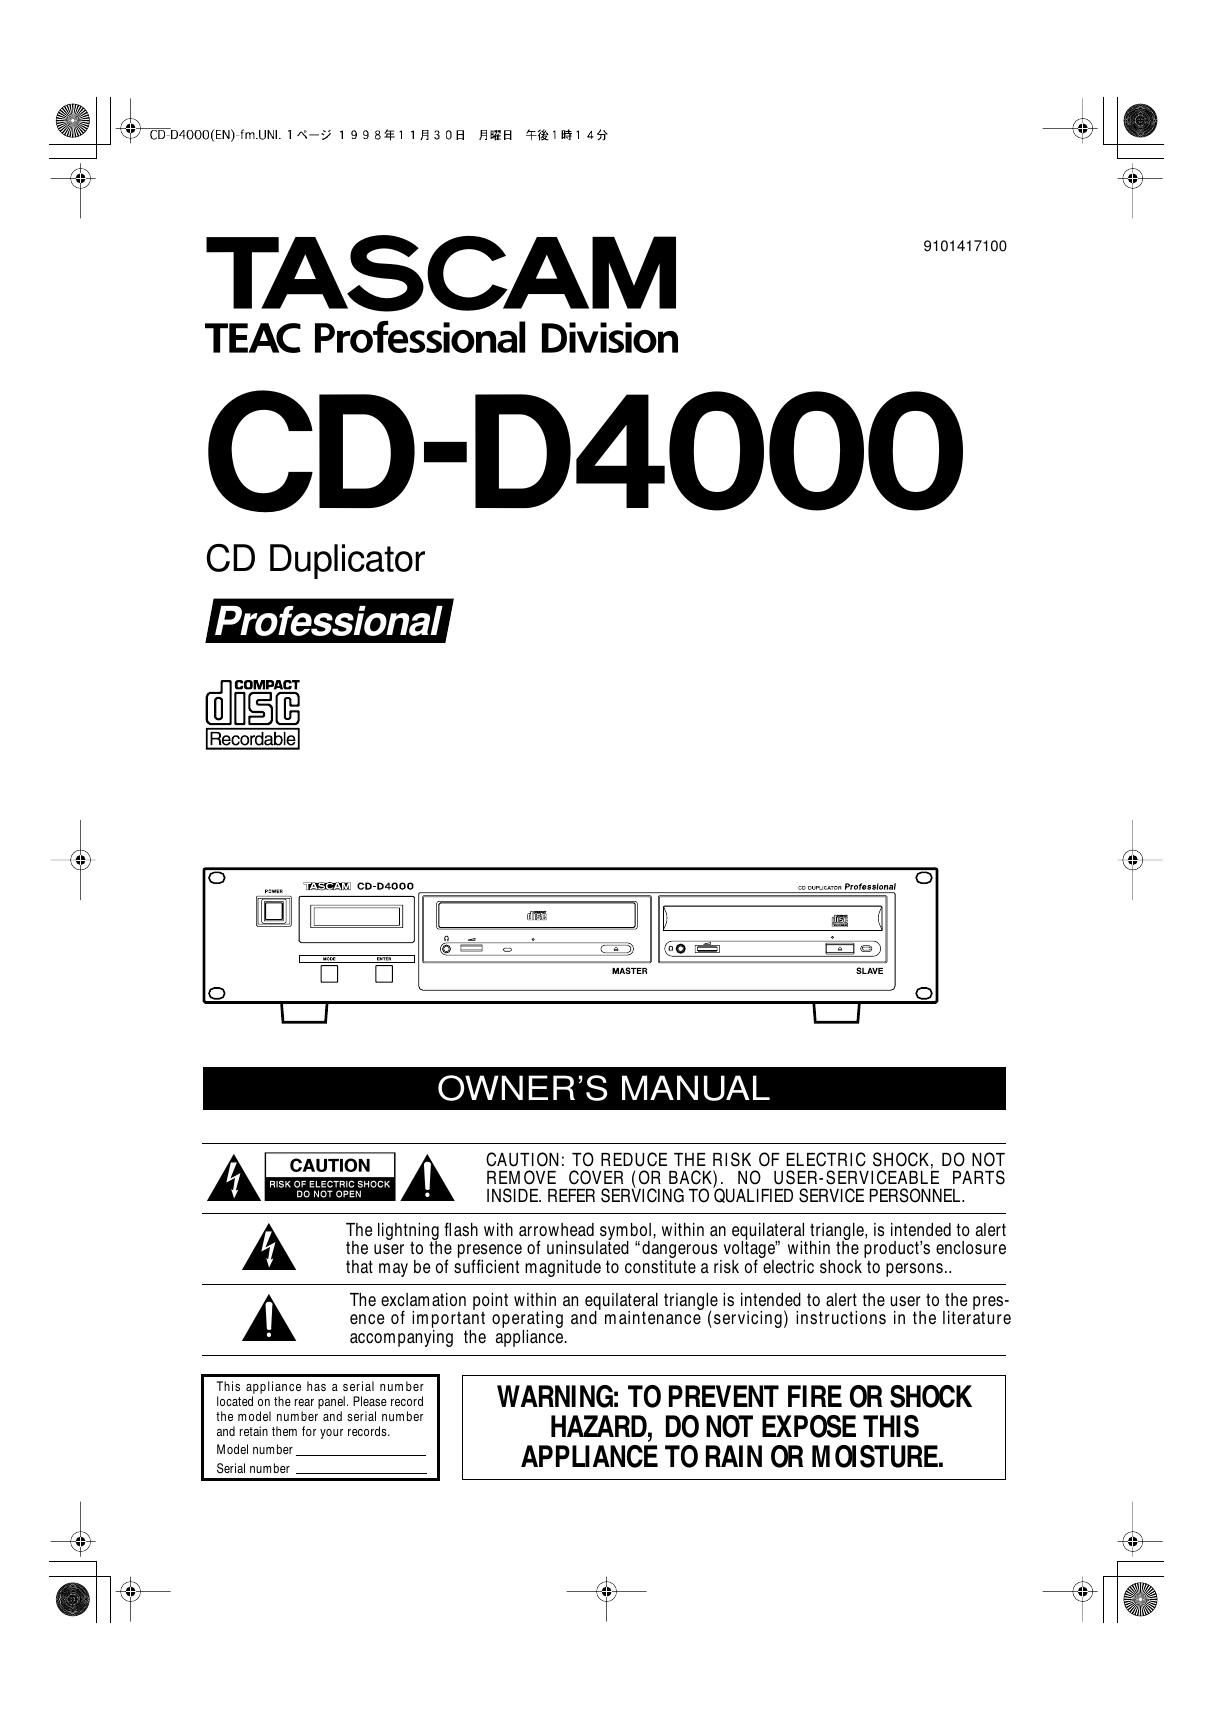 tascam cdd 4000 owners manual